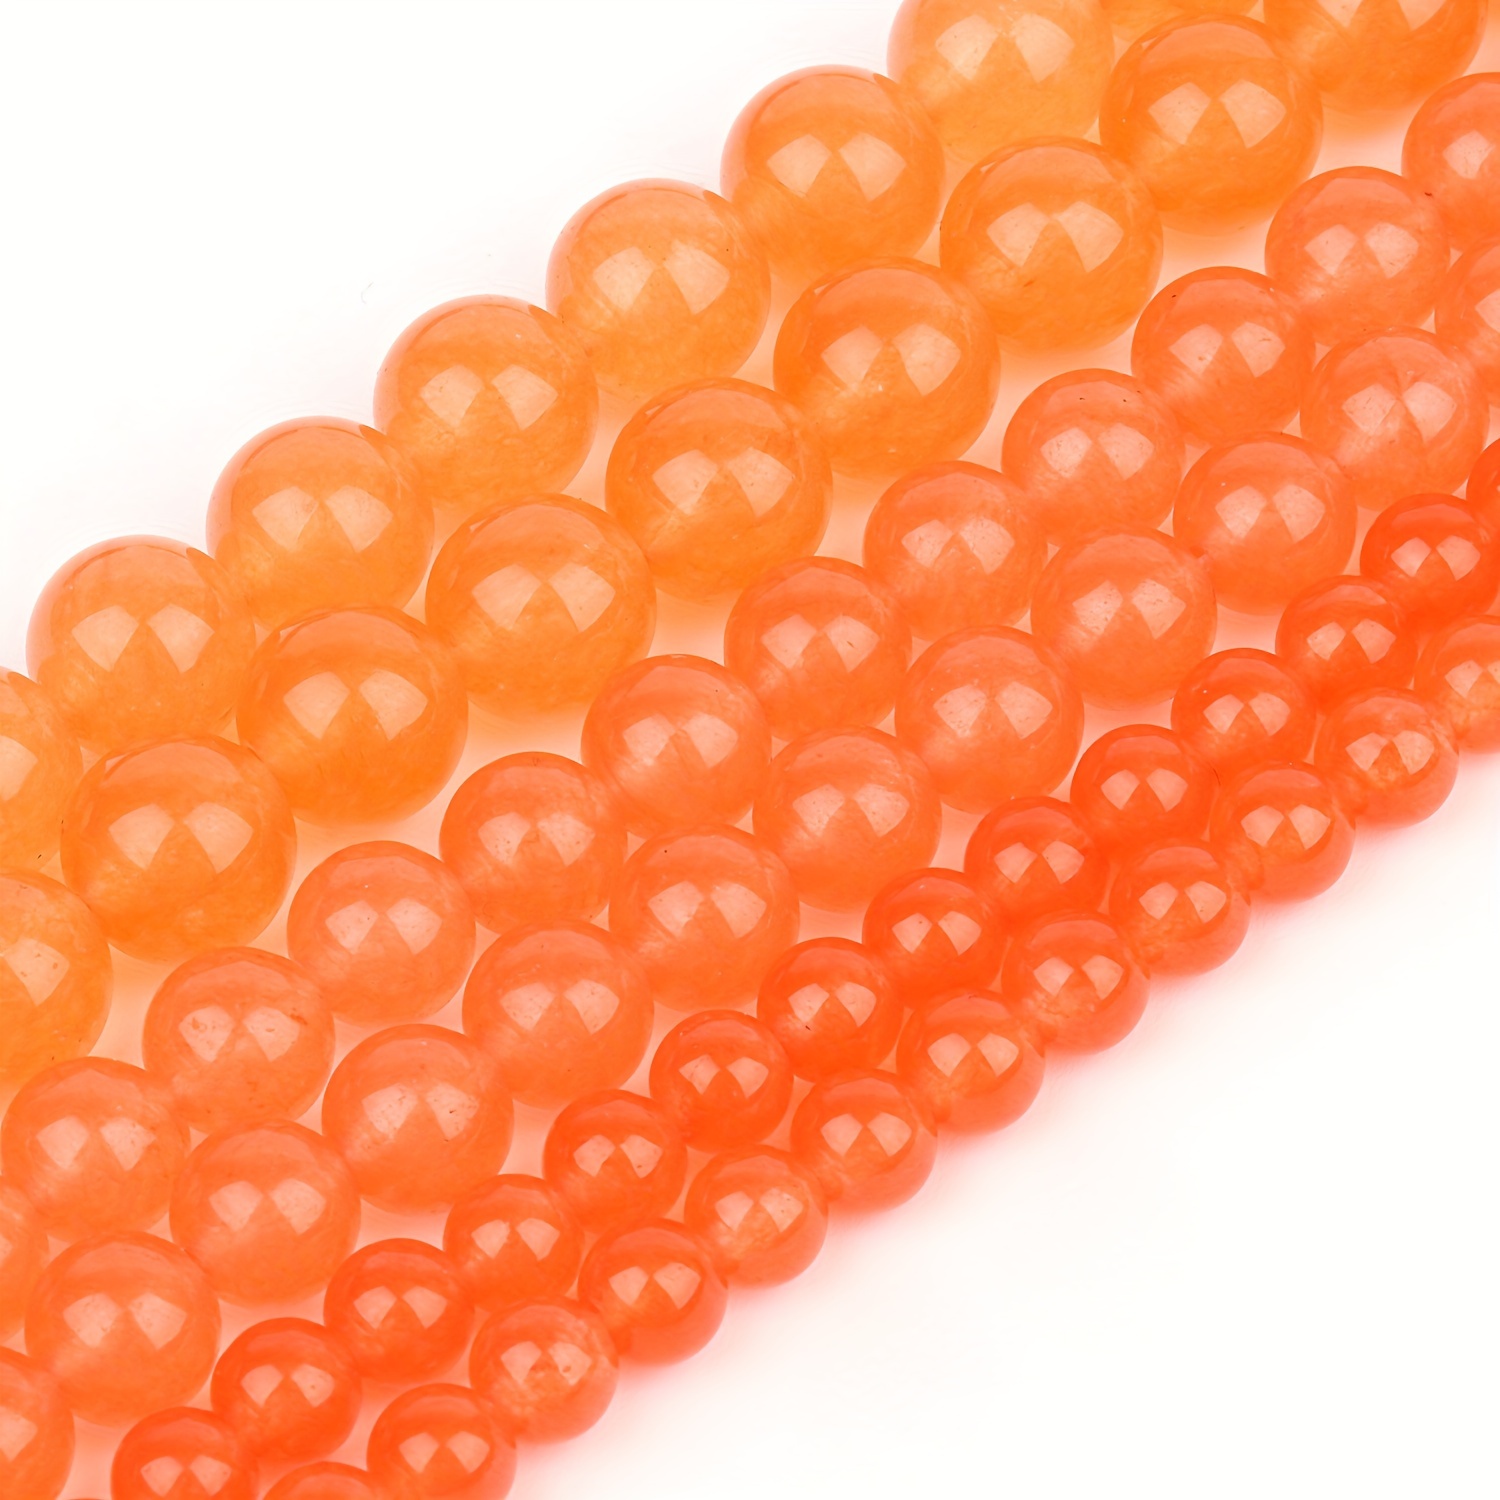 

4-12mm Natural Stone Orange Chalcedony Fashion Loose Spacer Beads For Jewelry Making Diy Unique Fashion Bracelets Necklace Craft Supplies Women Gifts